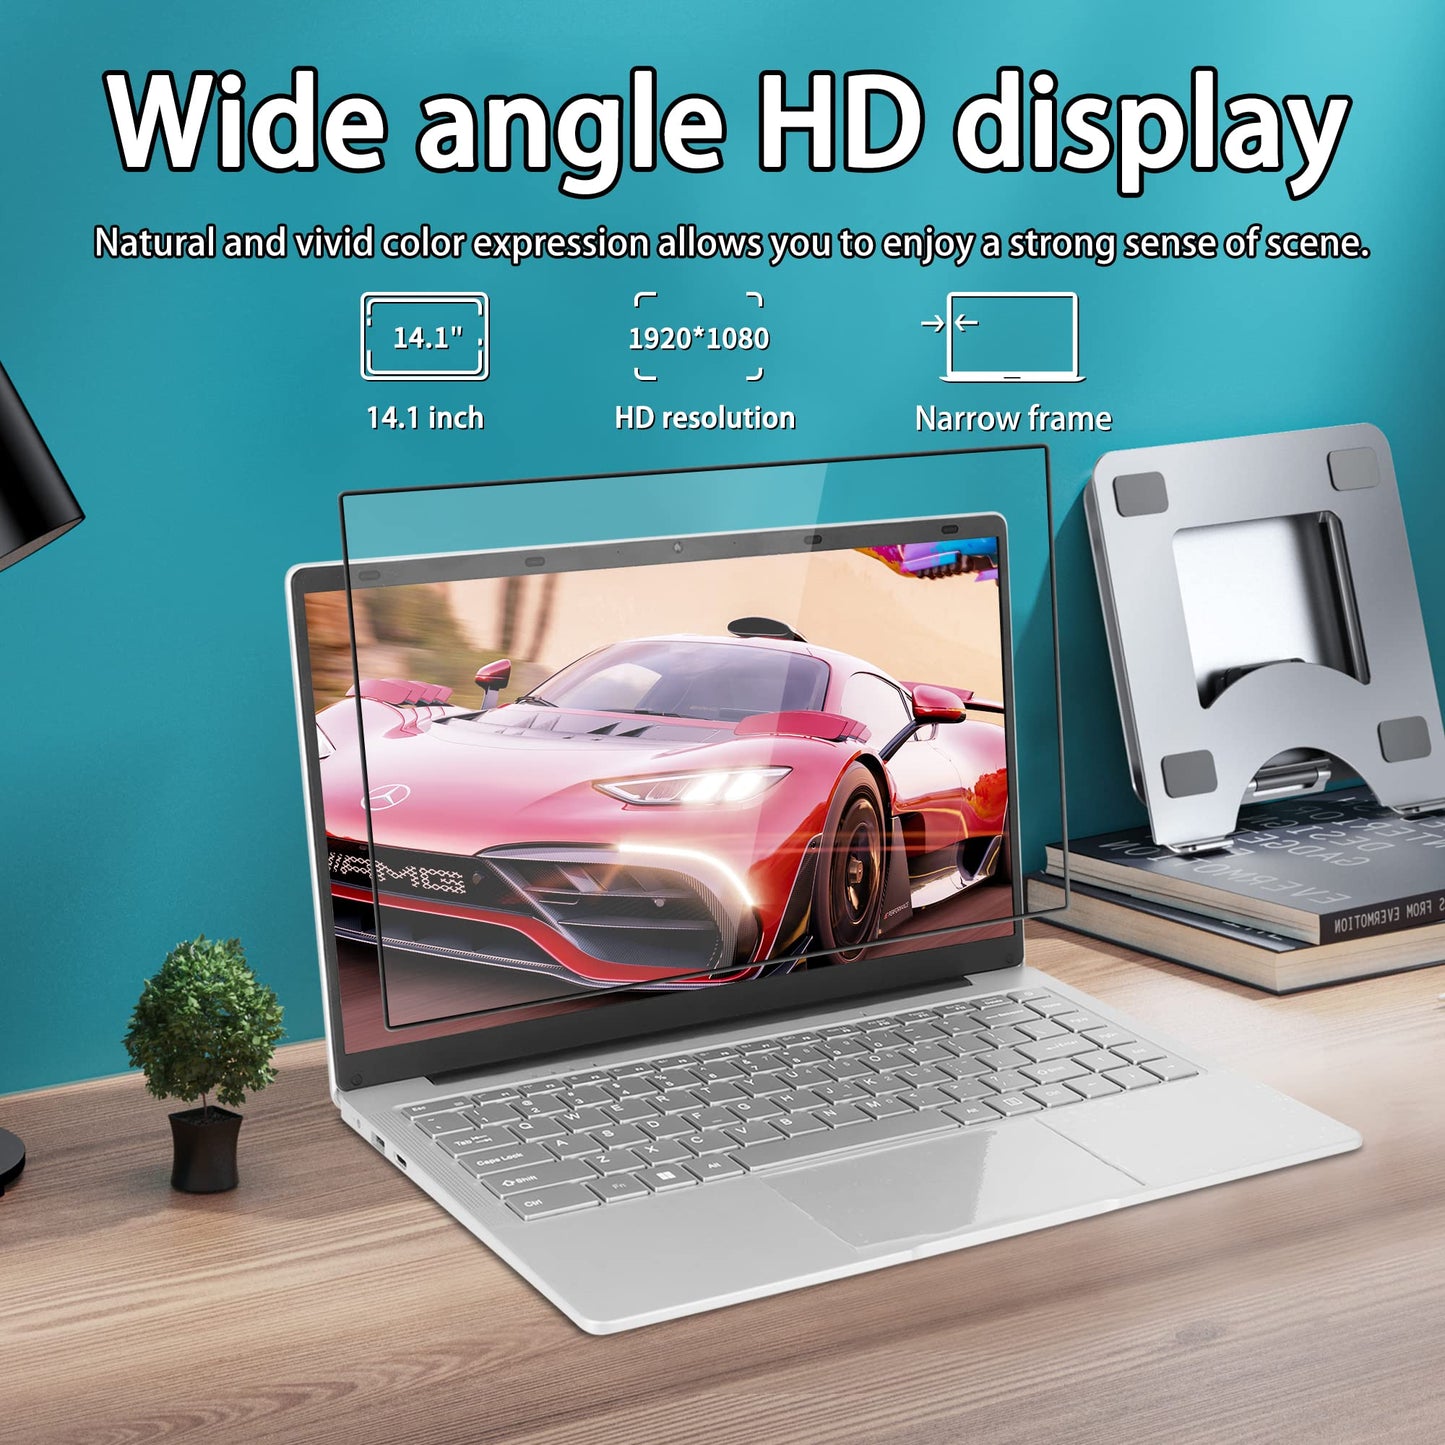 14" Silver FHD IPS Display Ultra-Thin Laptop, Celeron J4105 (up to2.8GHz), 8GB DDR4 RAM, 512GB SSD, 180° Opening, 2 USB3.0, WiFi/BT, Perfect for Travel, Study and Work